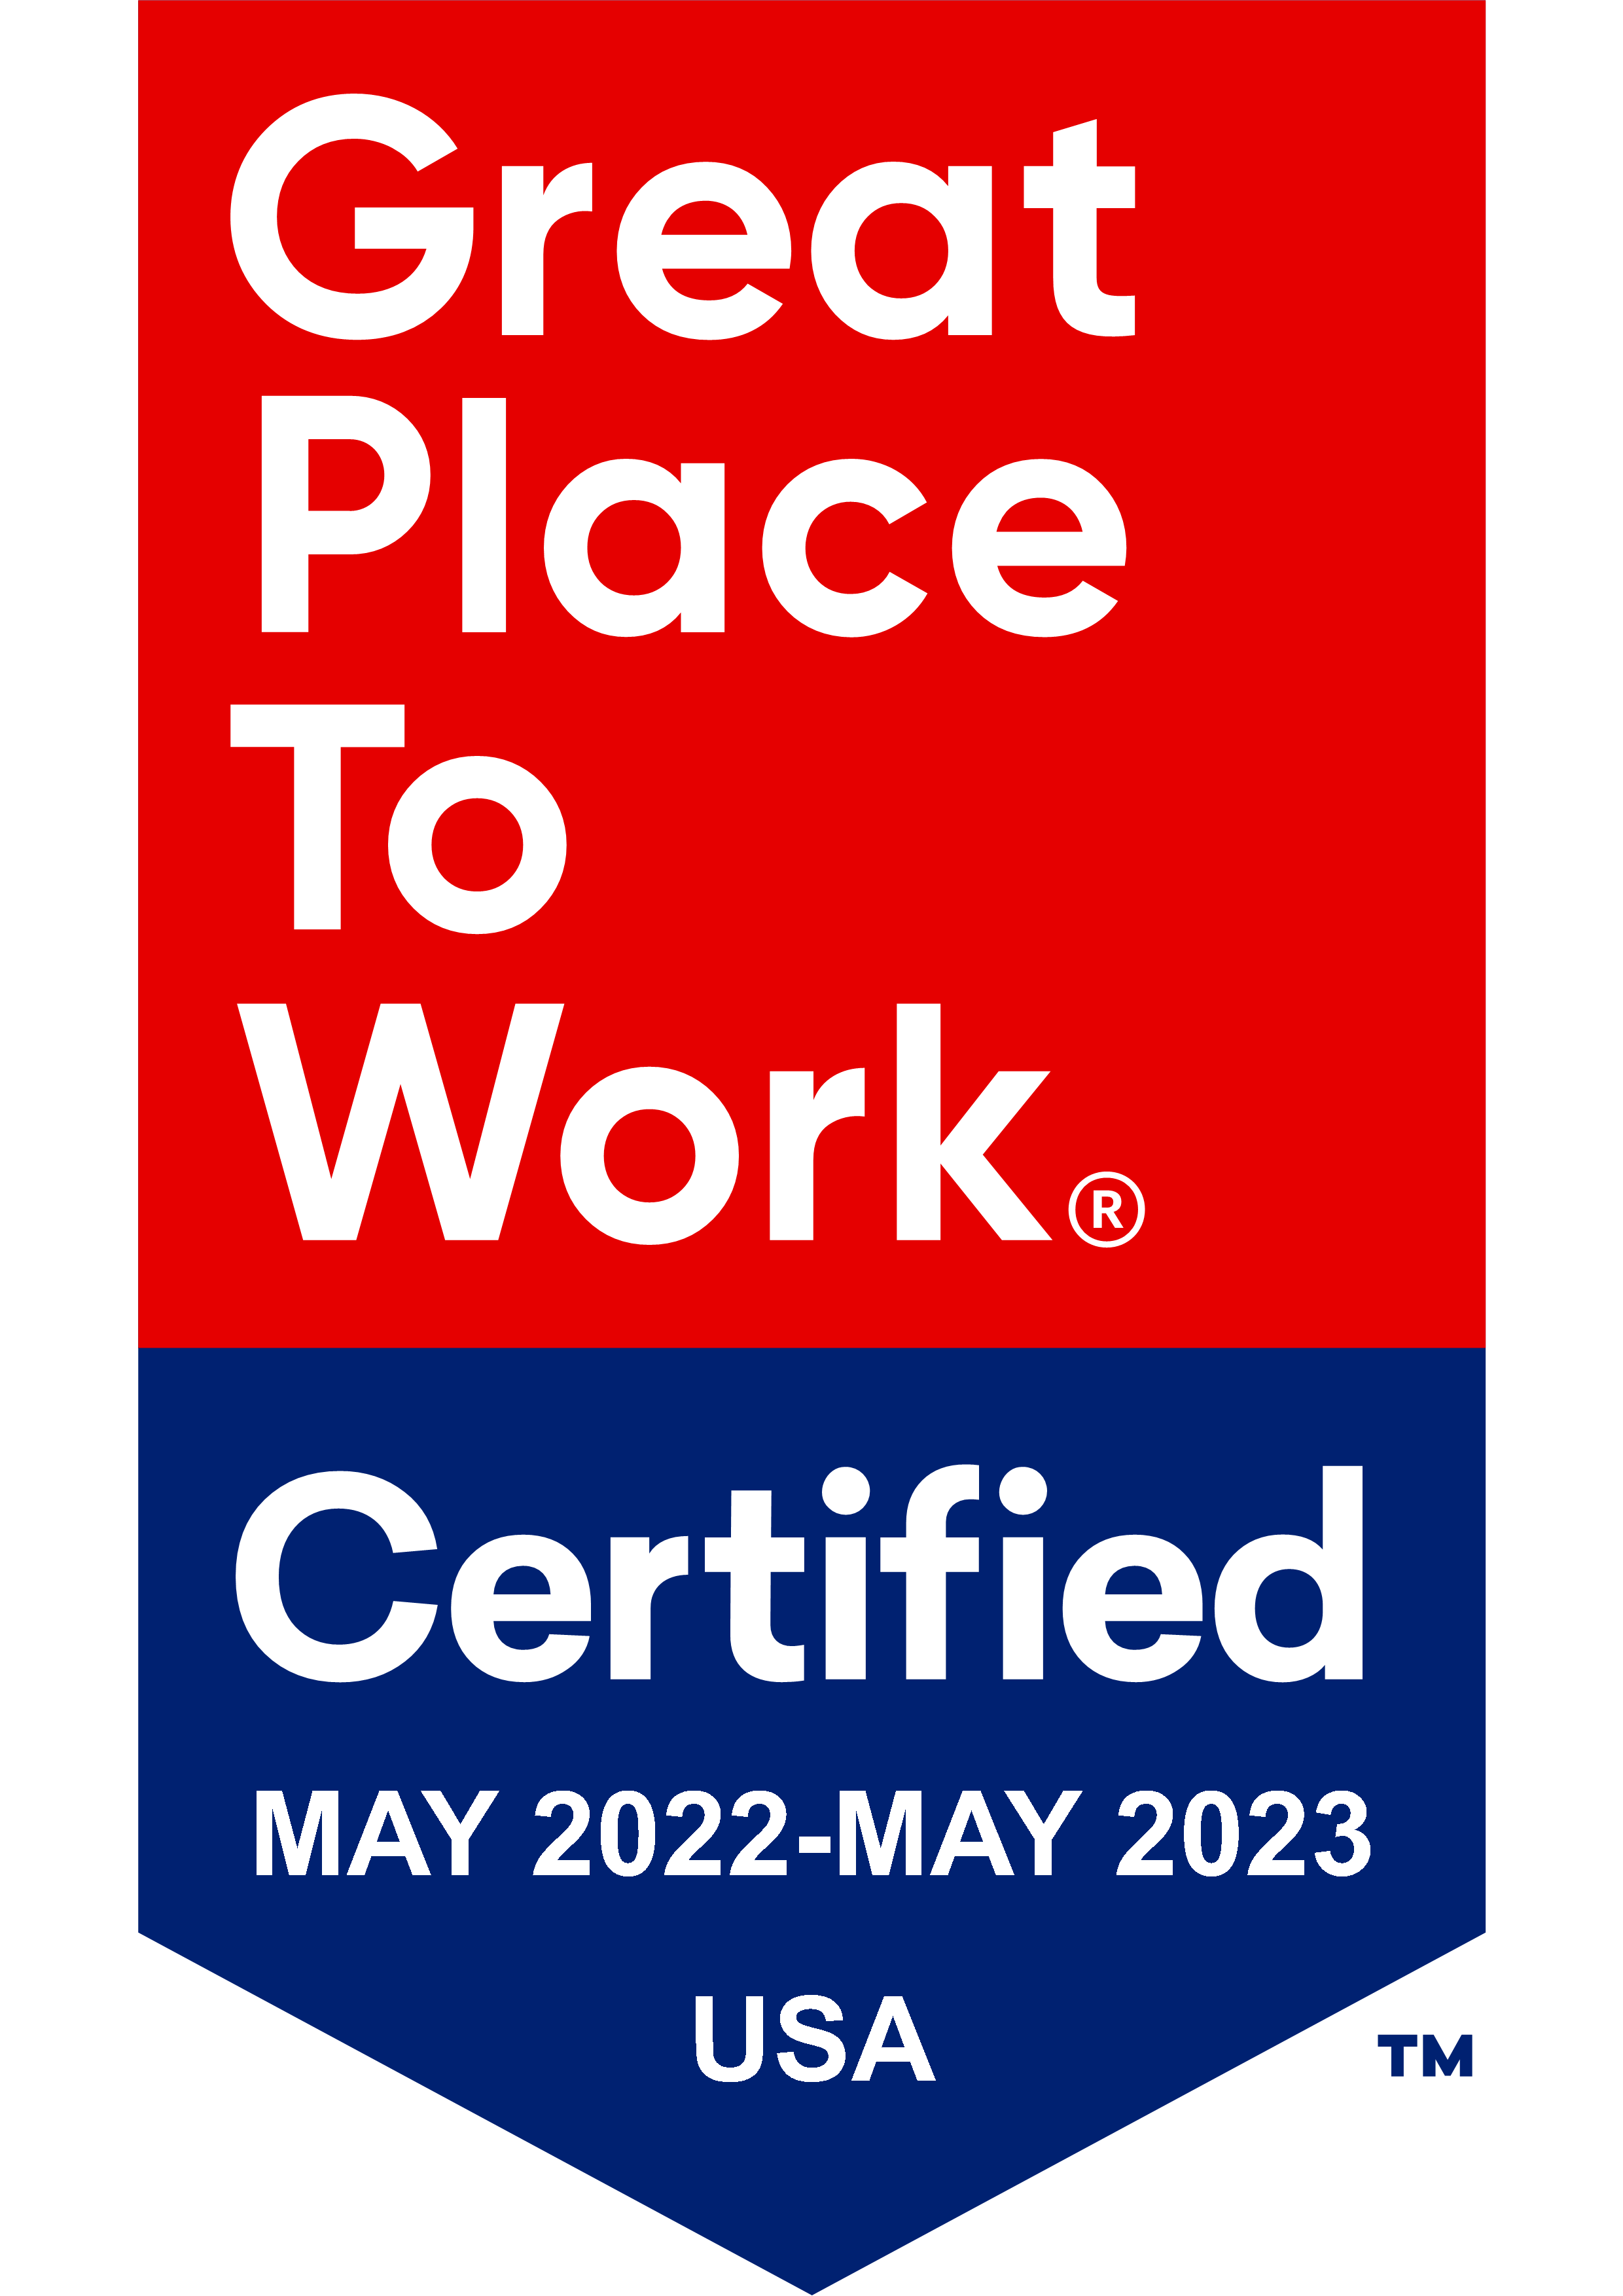 great place to work logo 2022-2023